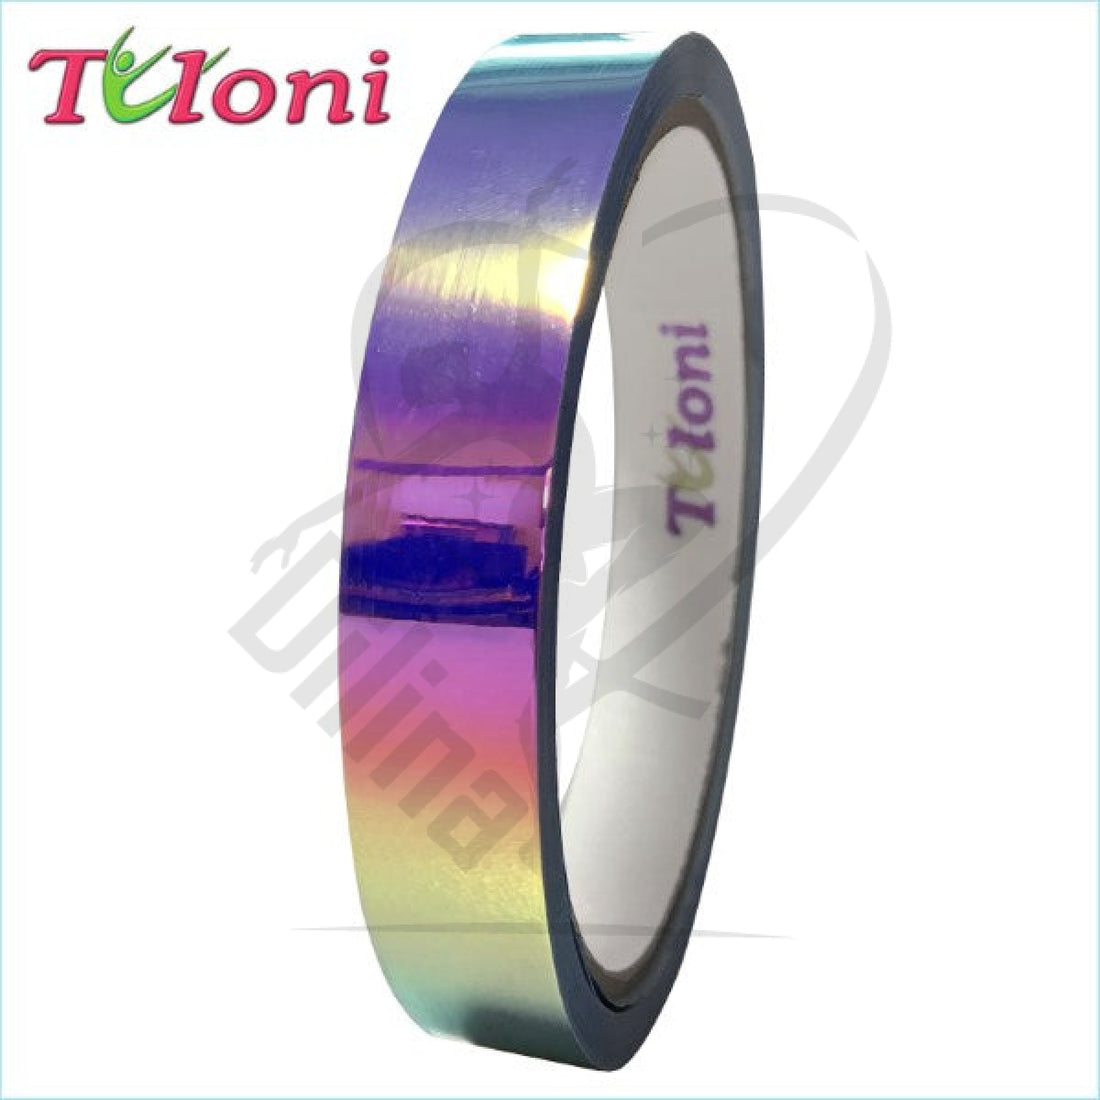 Tuloni Holographic Tape Tapes